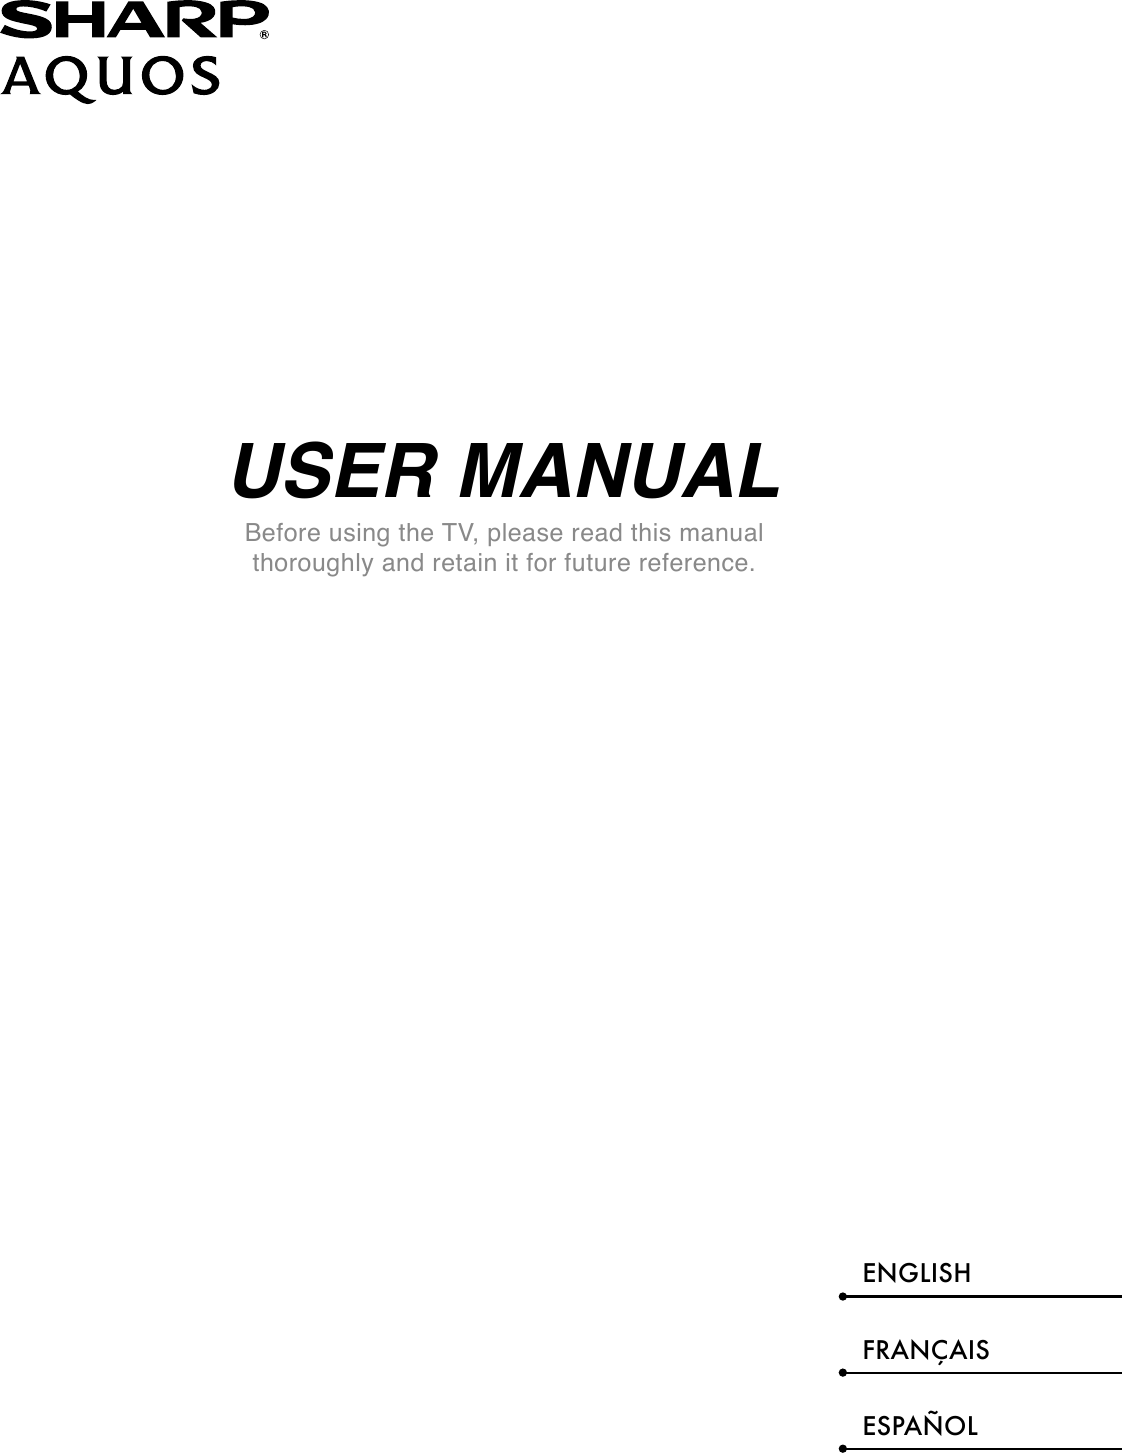 USER MANUALBefore using the TV, please read this manual thoroughly and retain it for future reference.ENGLISHFRANÇAISESPAÑOL